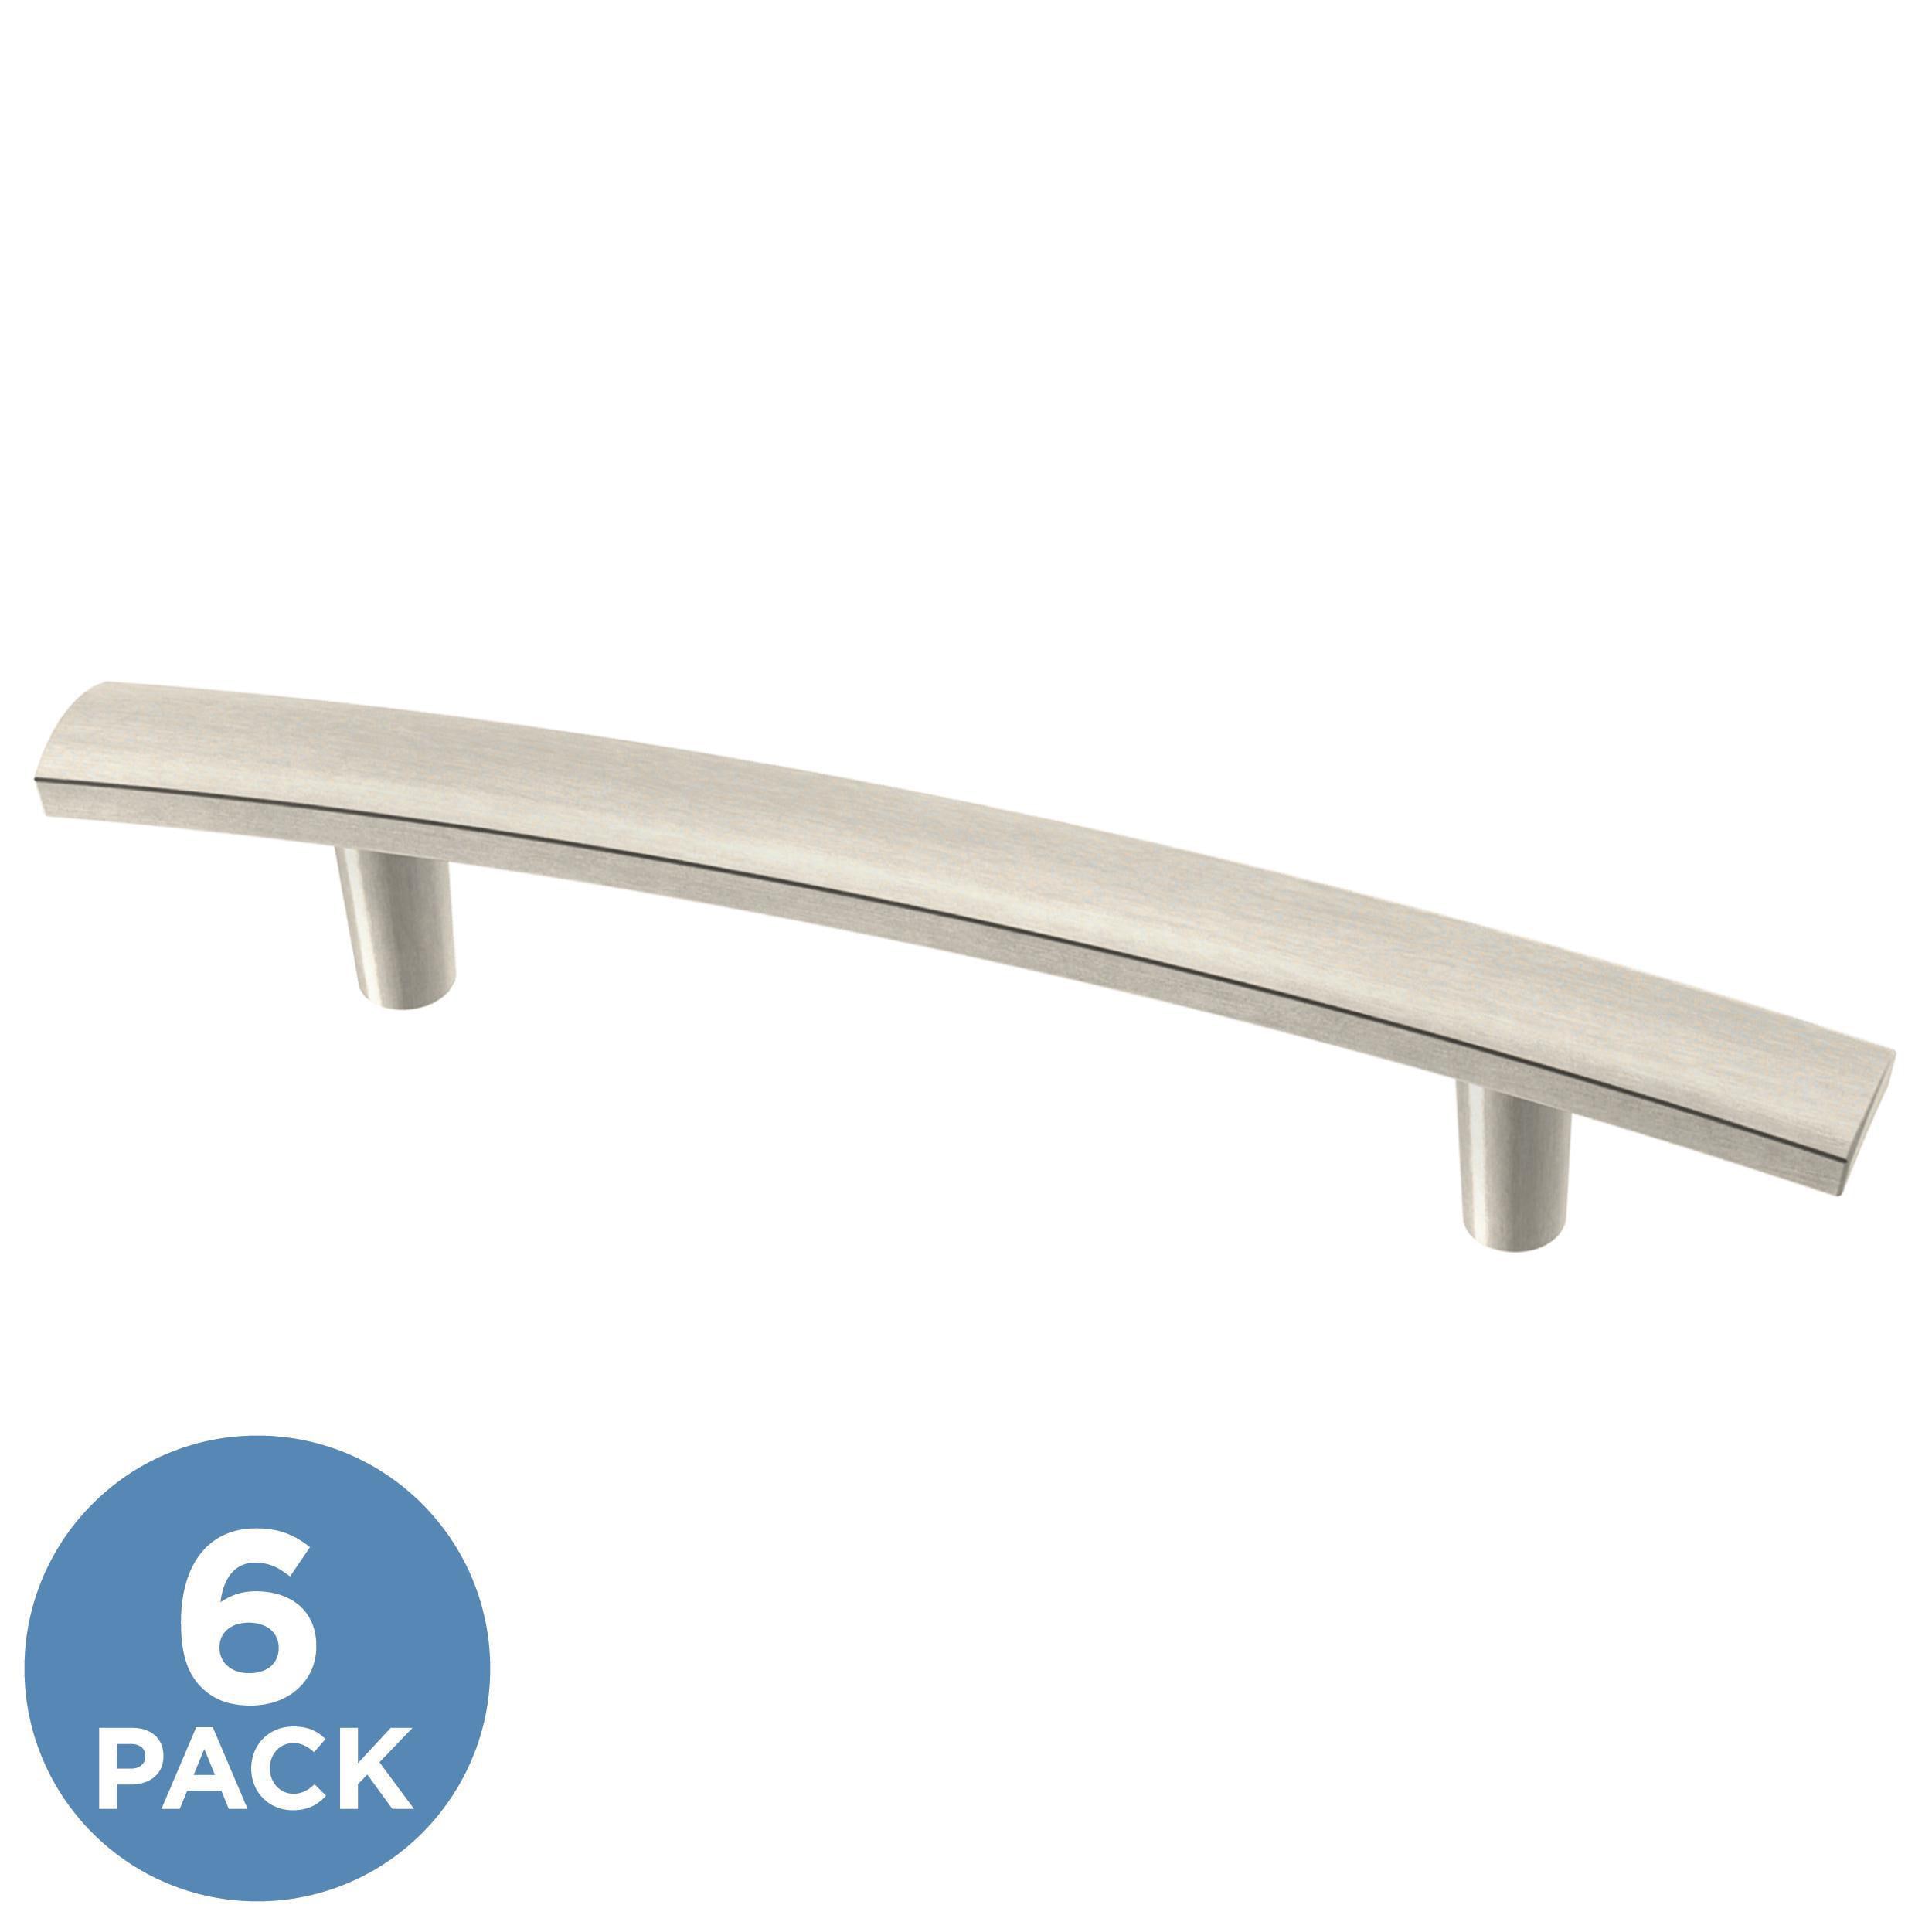 20 Pack 5'' Cabinet Pulls Brushed Nickel Stainless Steel Kitchen